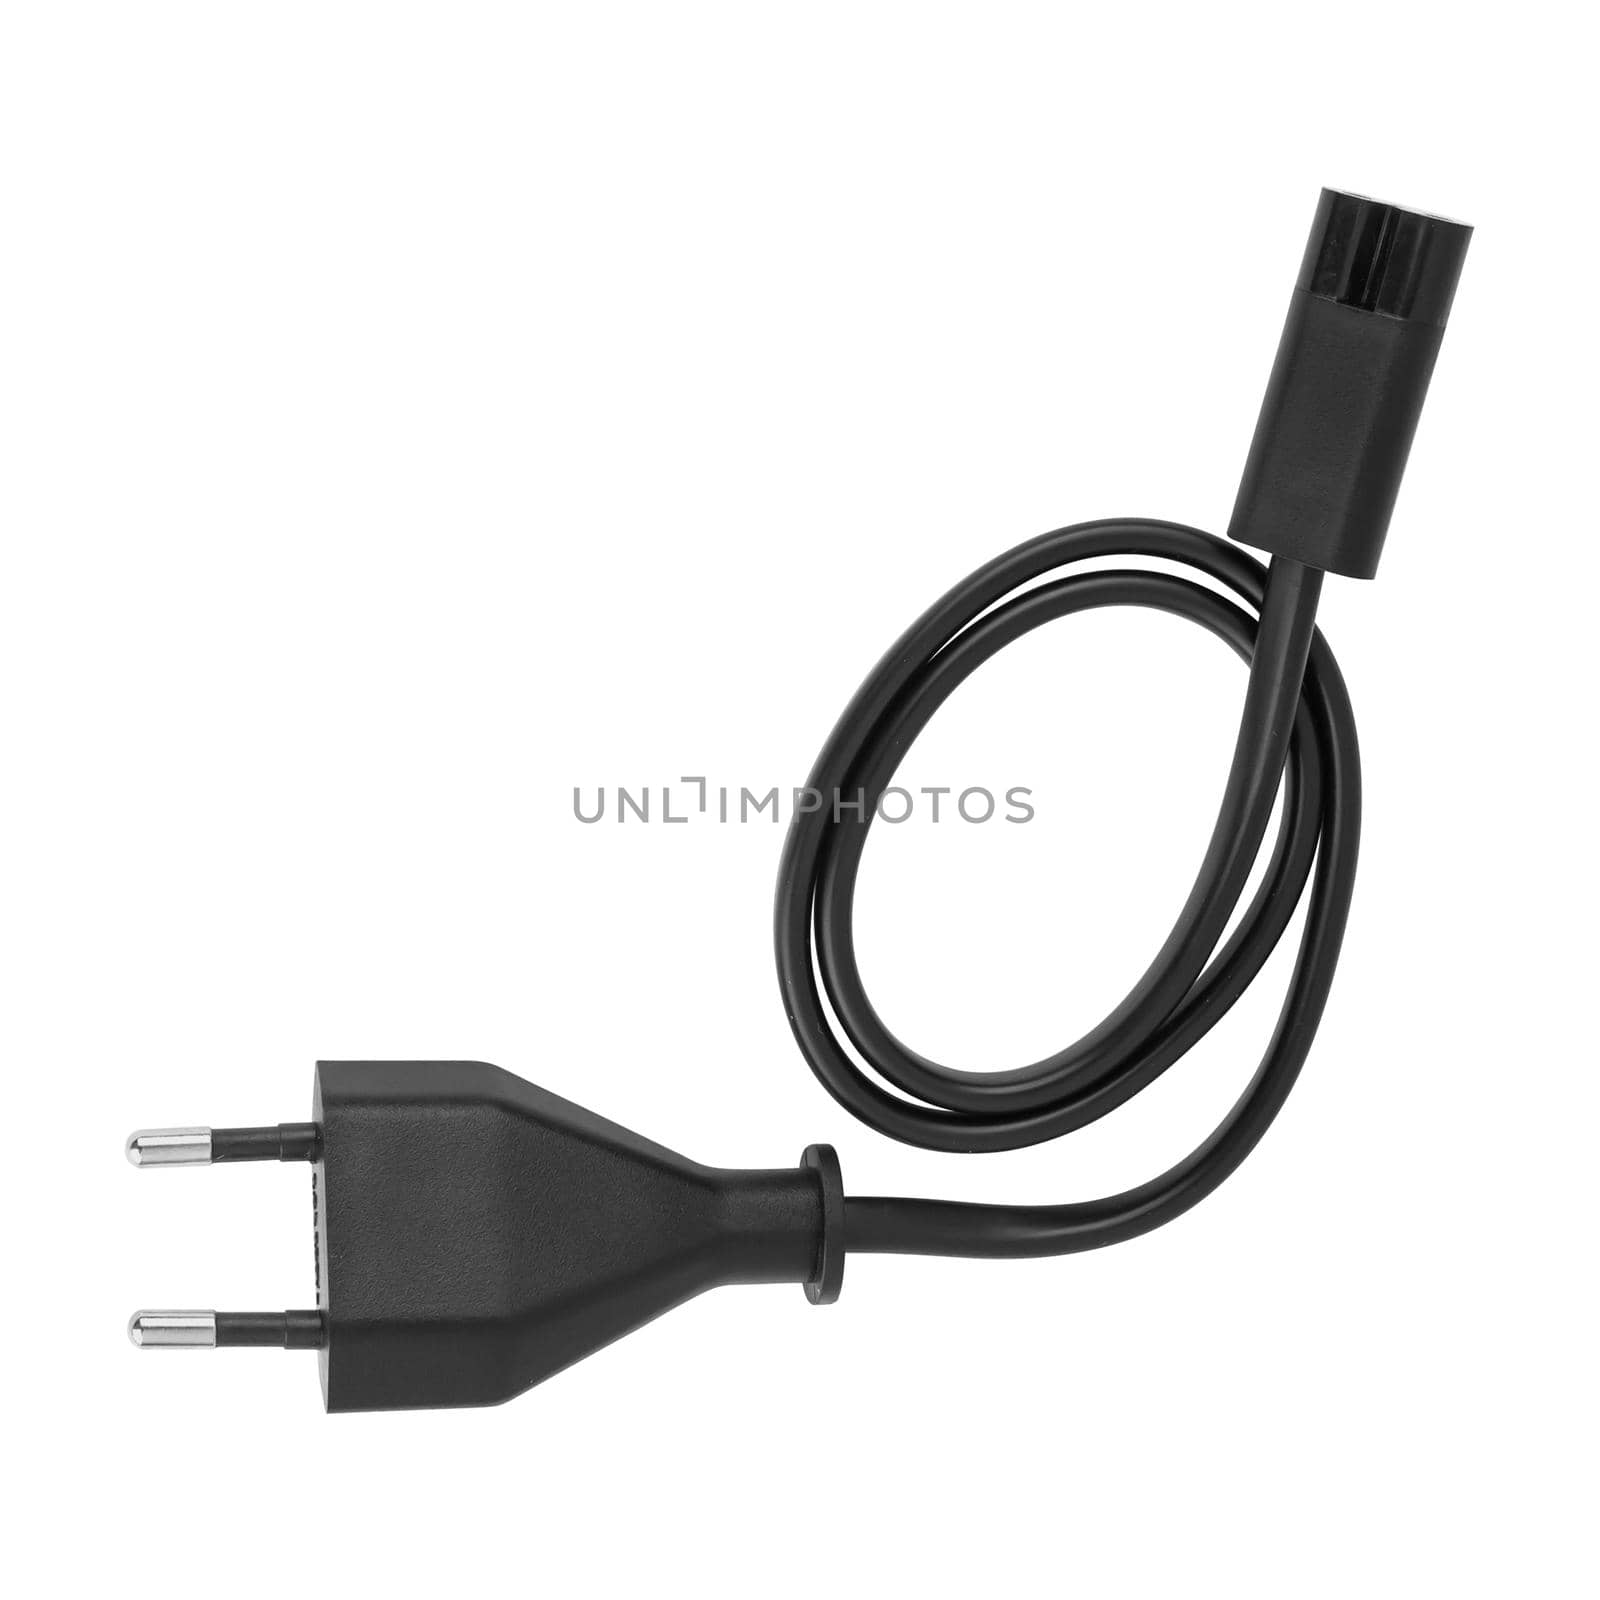 power cord with plug and two-pin power connector on a white background